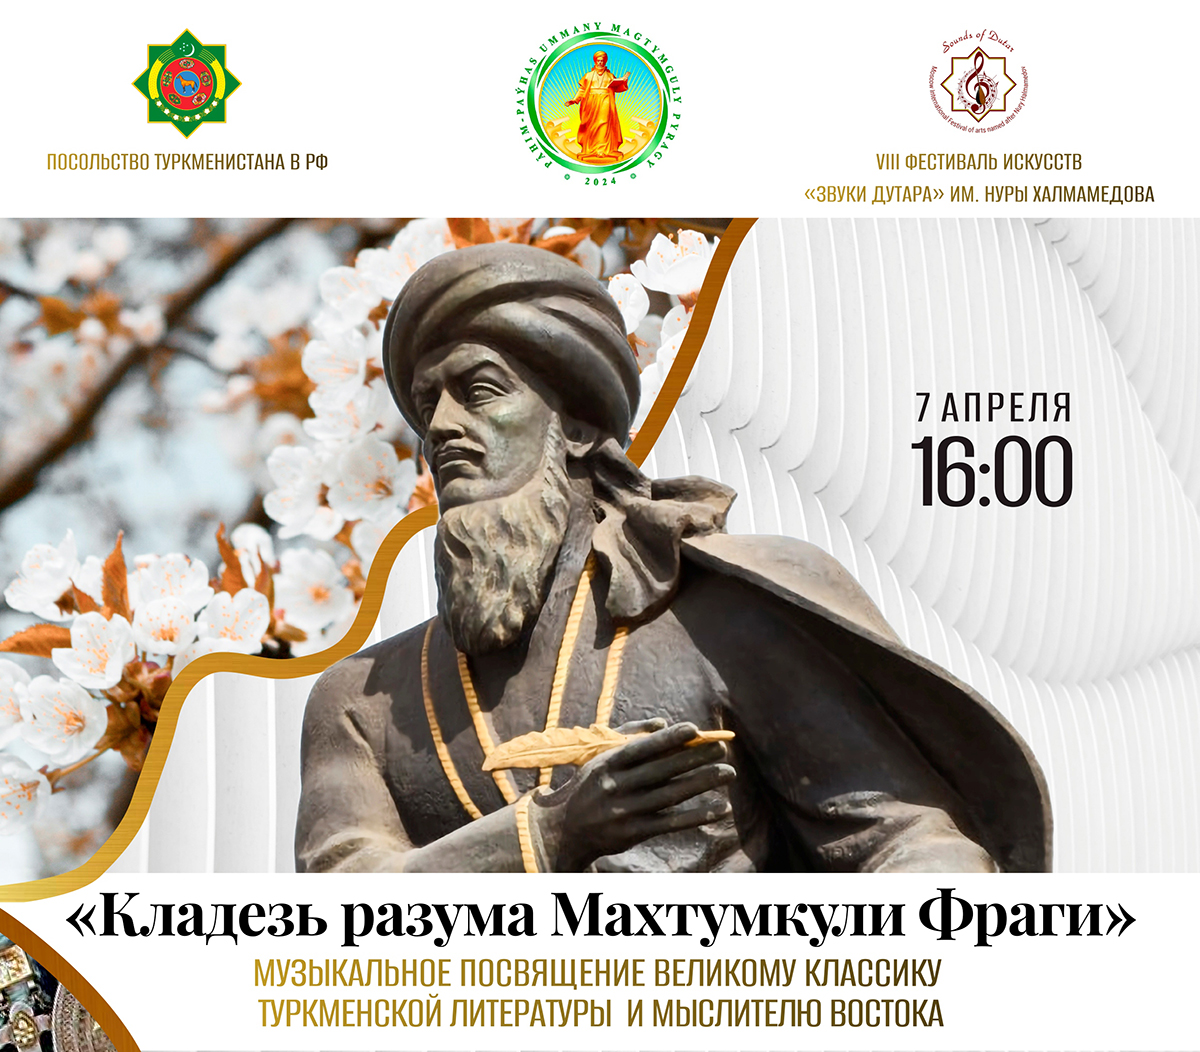 Dedication Concert "Fount of Wisdom Magtymguly Fragi" will be held in Moscow